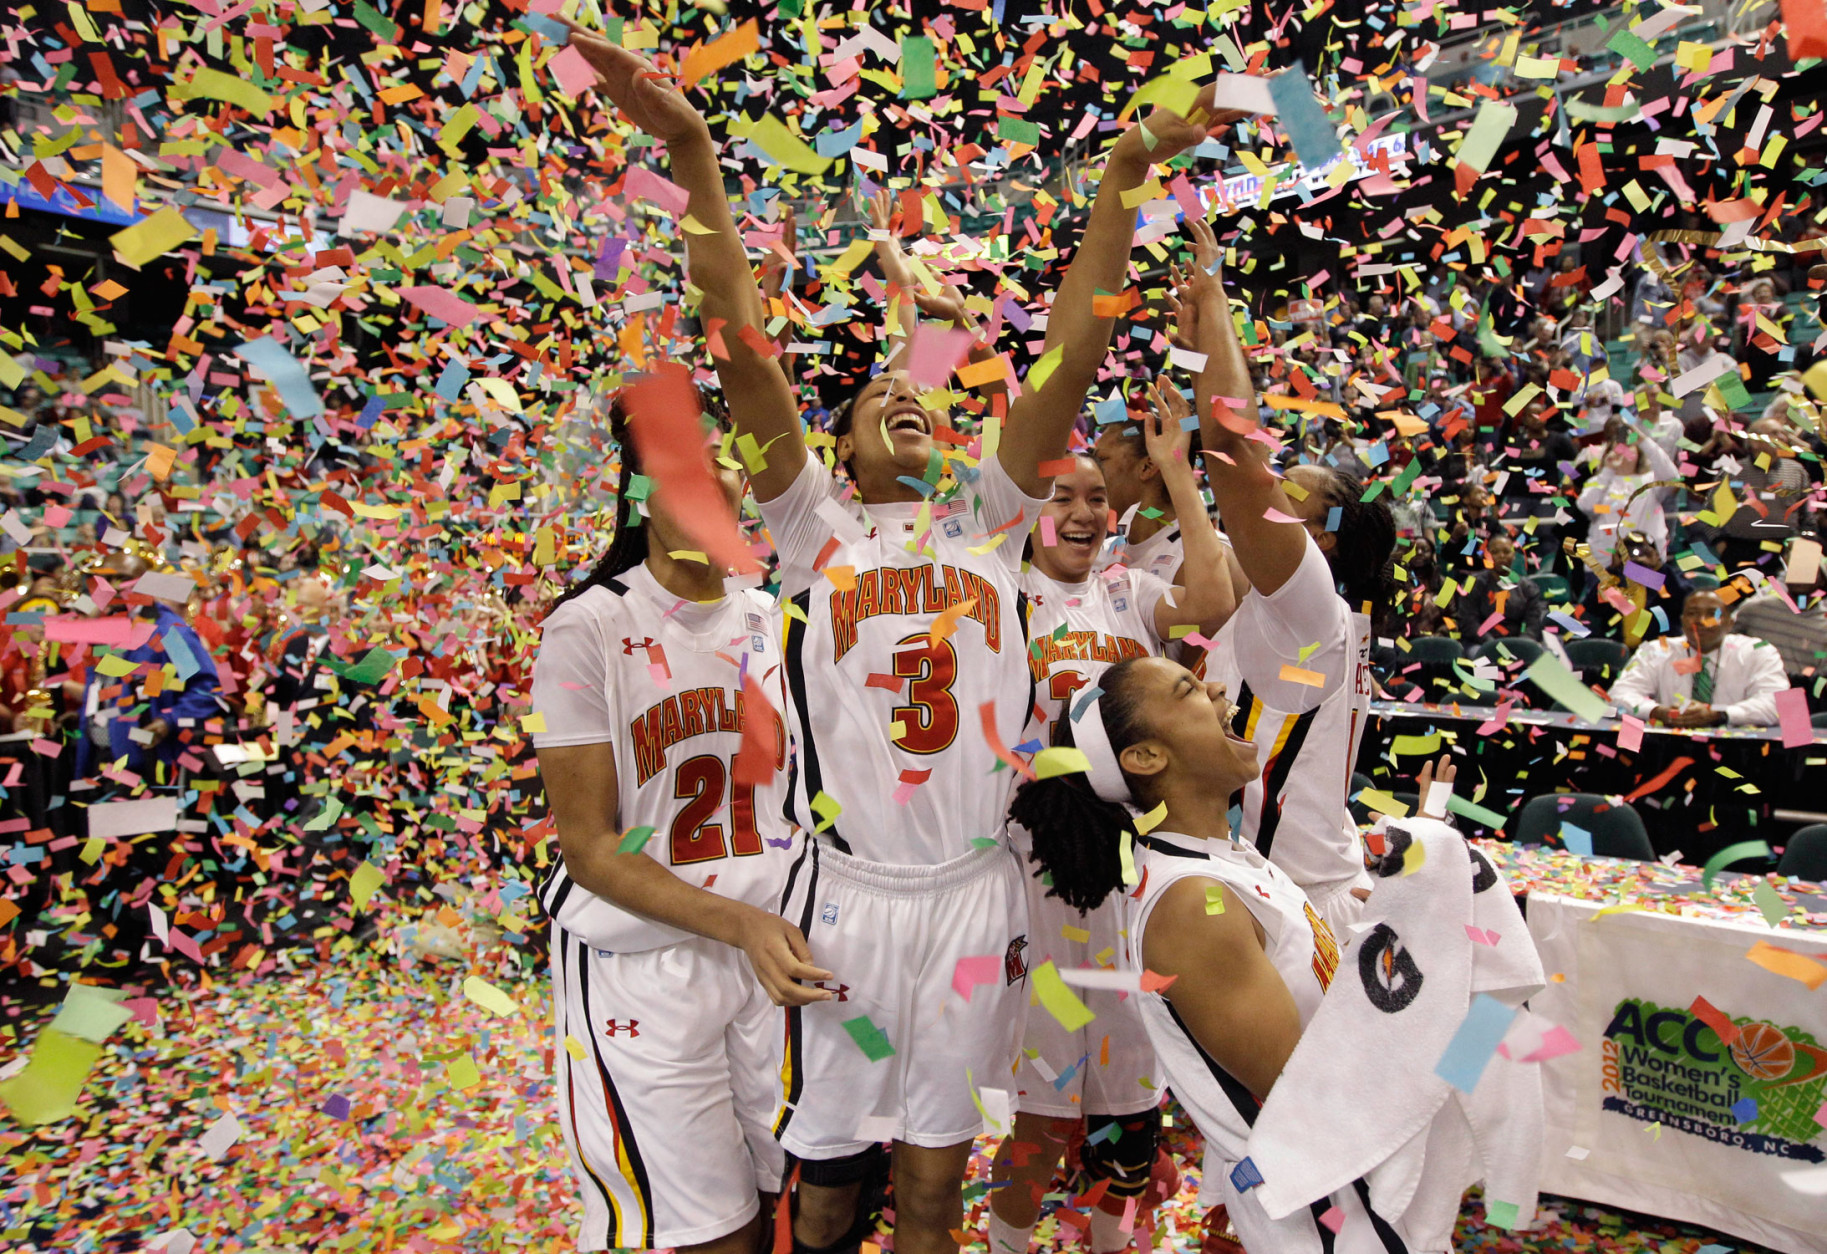 Maryland's Brene Moseley, center, Tianna Hawkins, left, and Sequoia Austin, right, celebrate their 68-65 win over Georgia Tech in the NCAA Atlantic Coast Conference women's college tournament basketball championship game, Sunday, March 4, 2012, in Greensboro, N.C. (AP Photo/Chuck Burton)